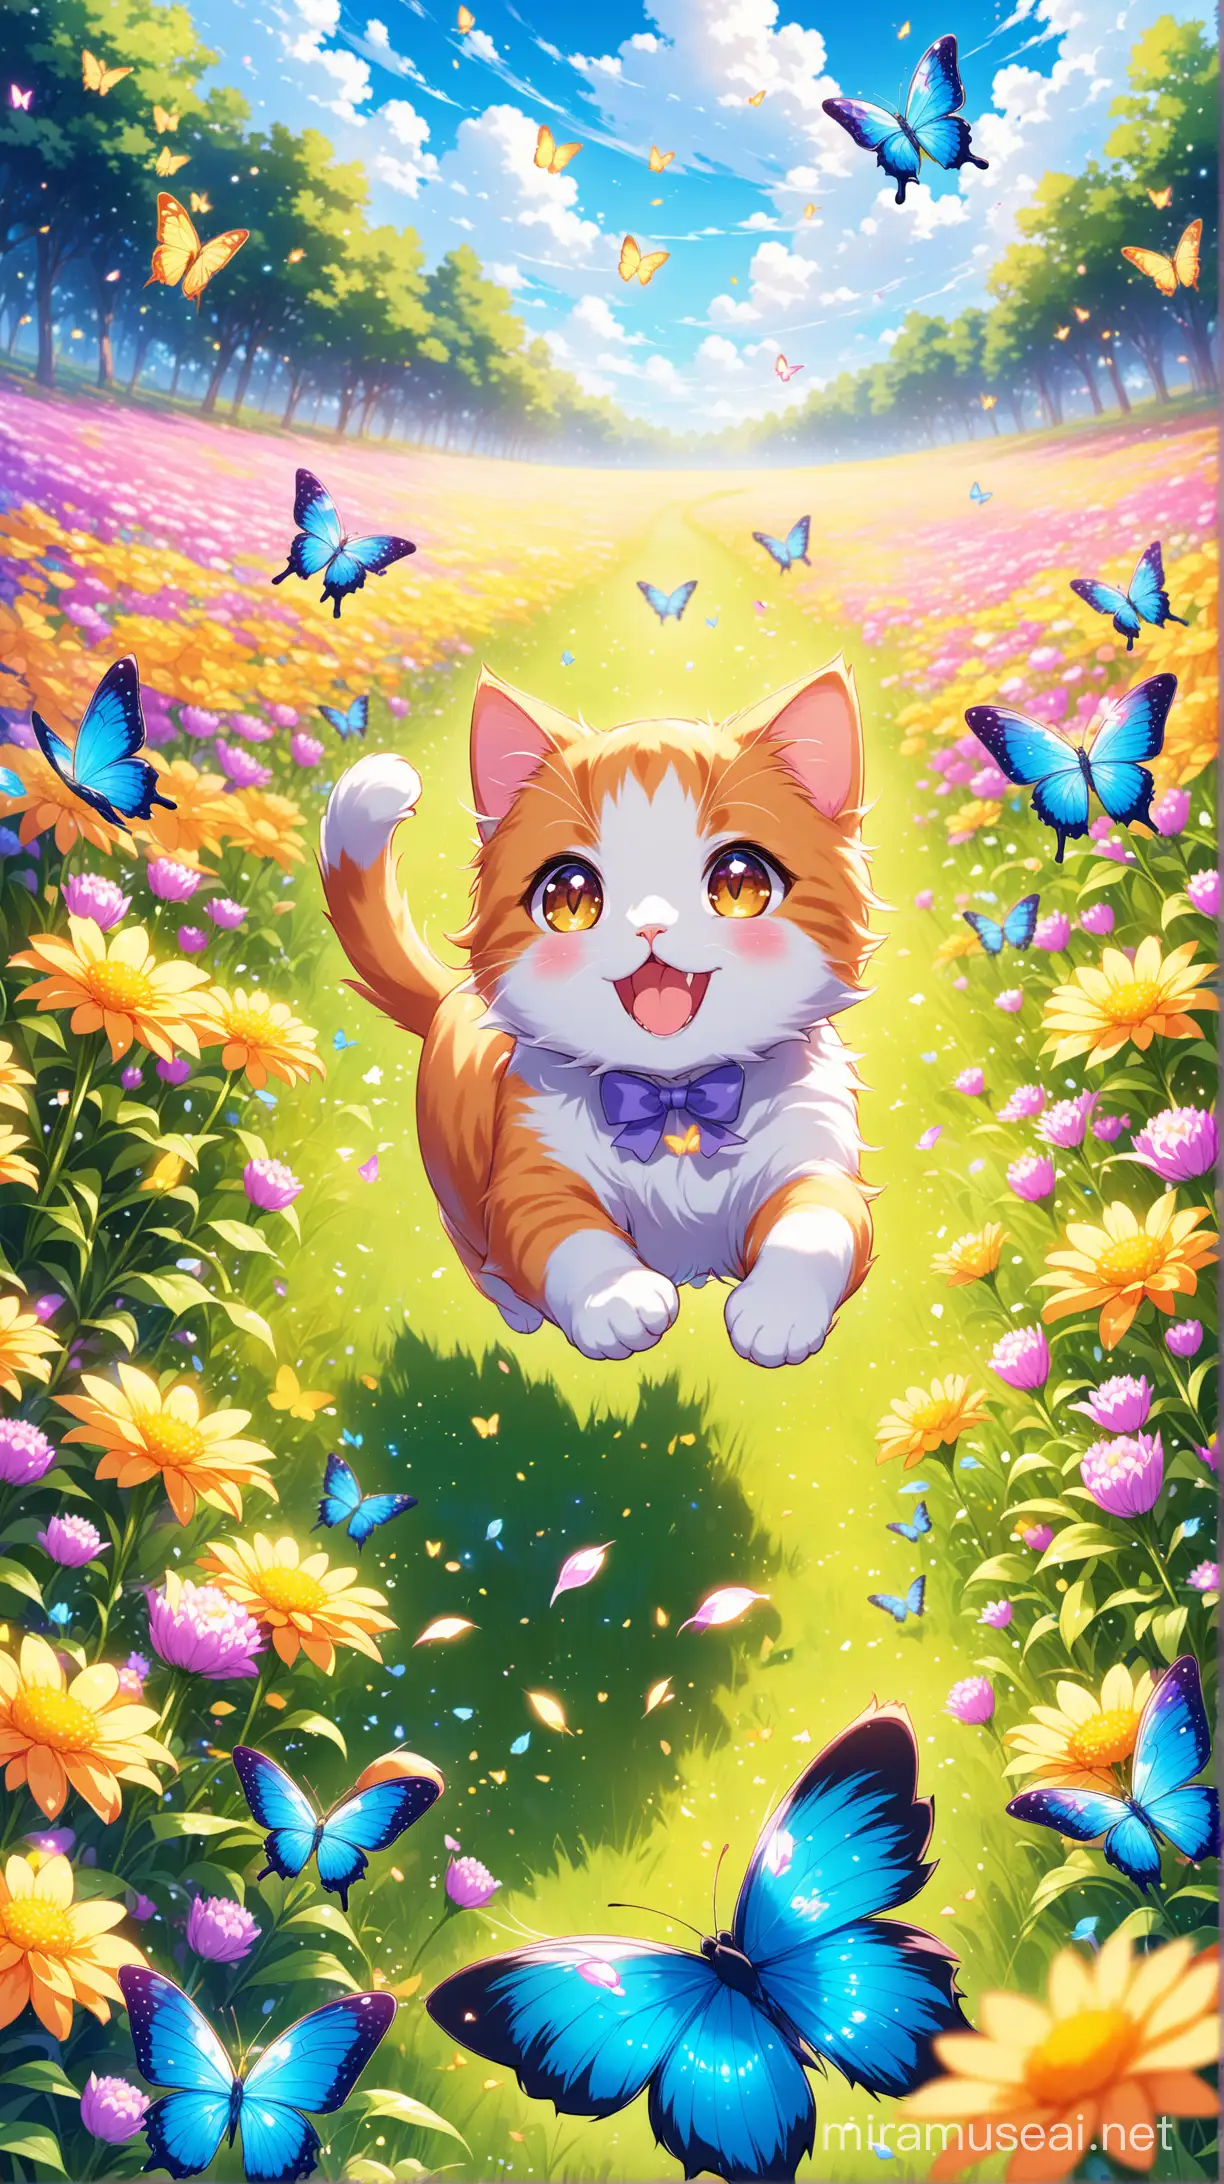 An adorable anime cat chasing after colorful butterflies in a field of flowers